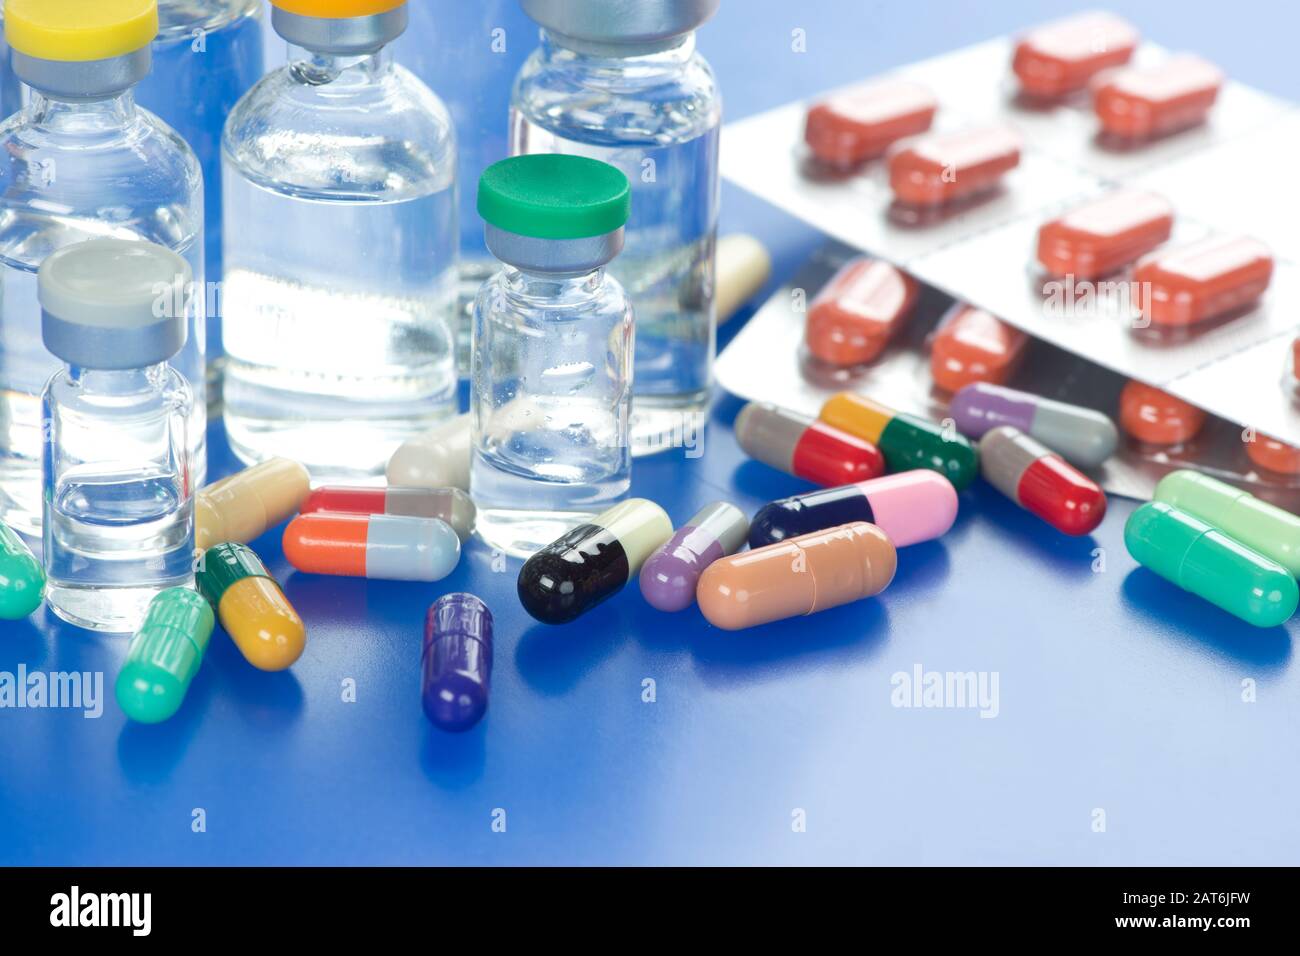 Many different colored medication capsules and foil pack with various injection vaccine vials on blue colored tray. Stock Photo